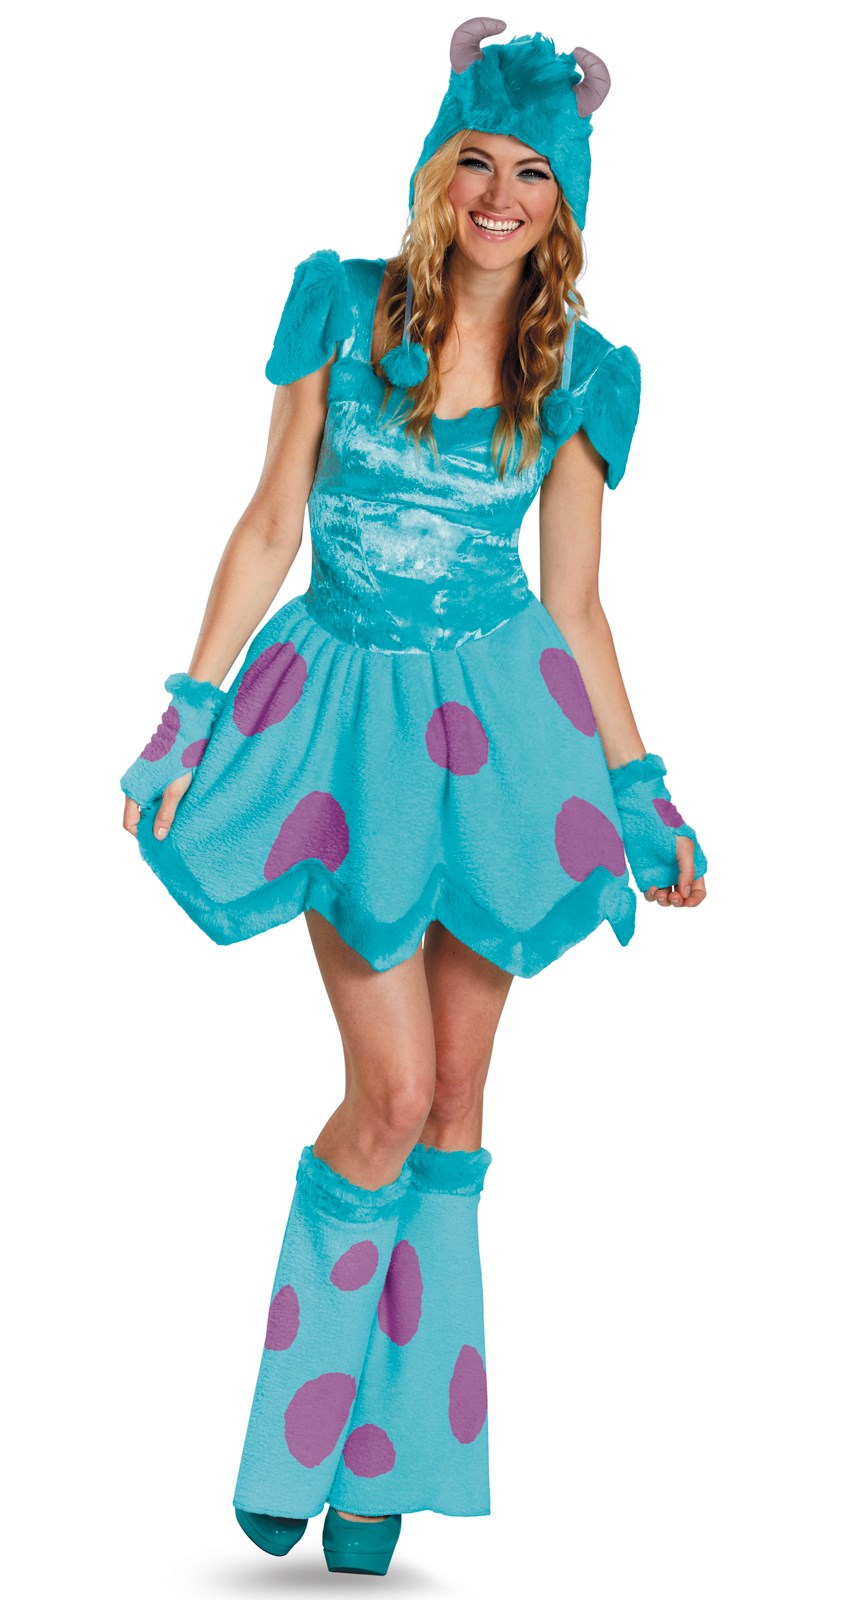 Monsters University Sassy Sulley Adult Costume